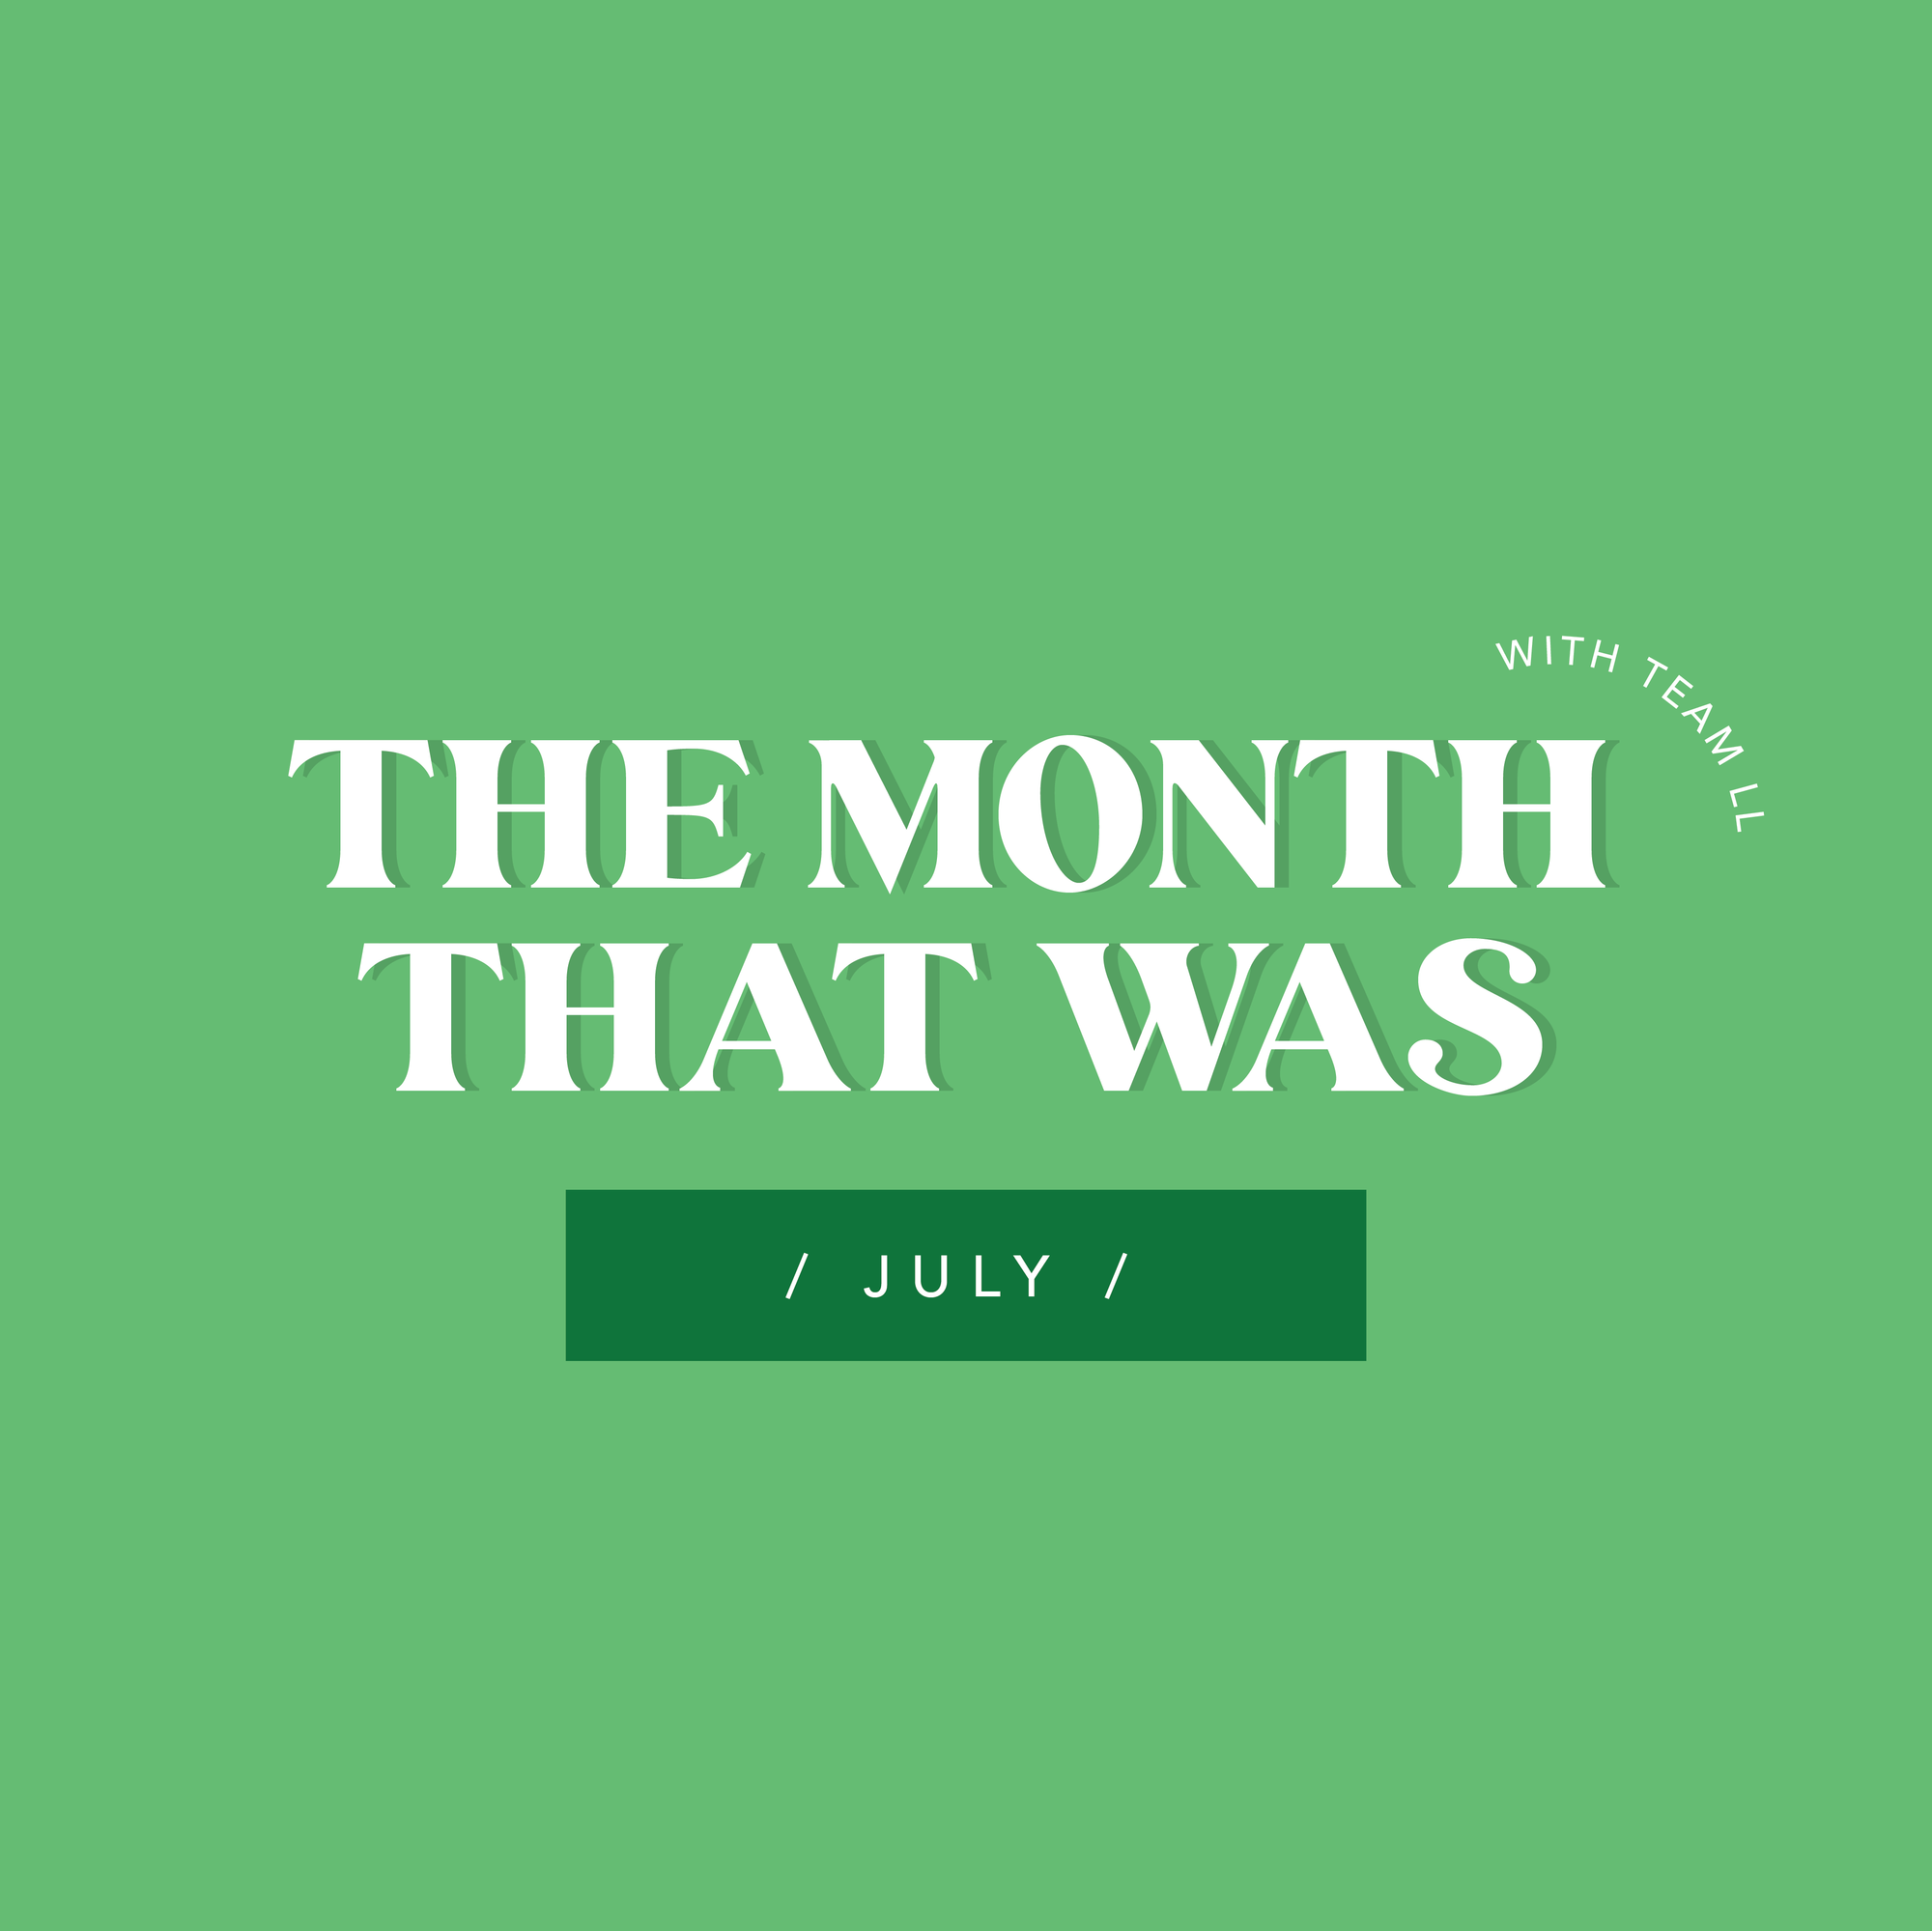 JULY: The Month That Was